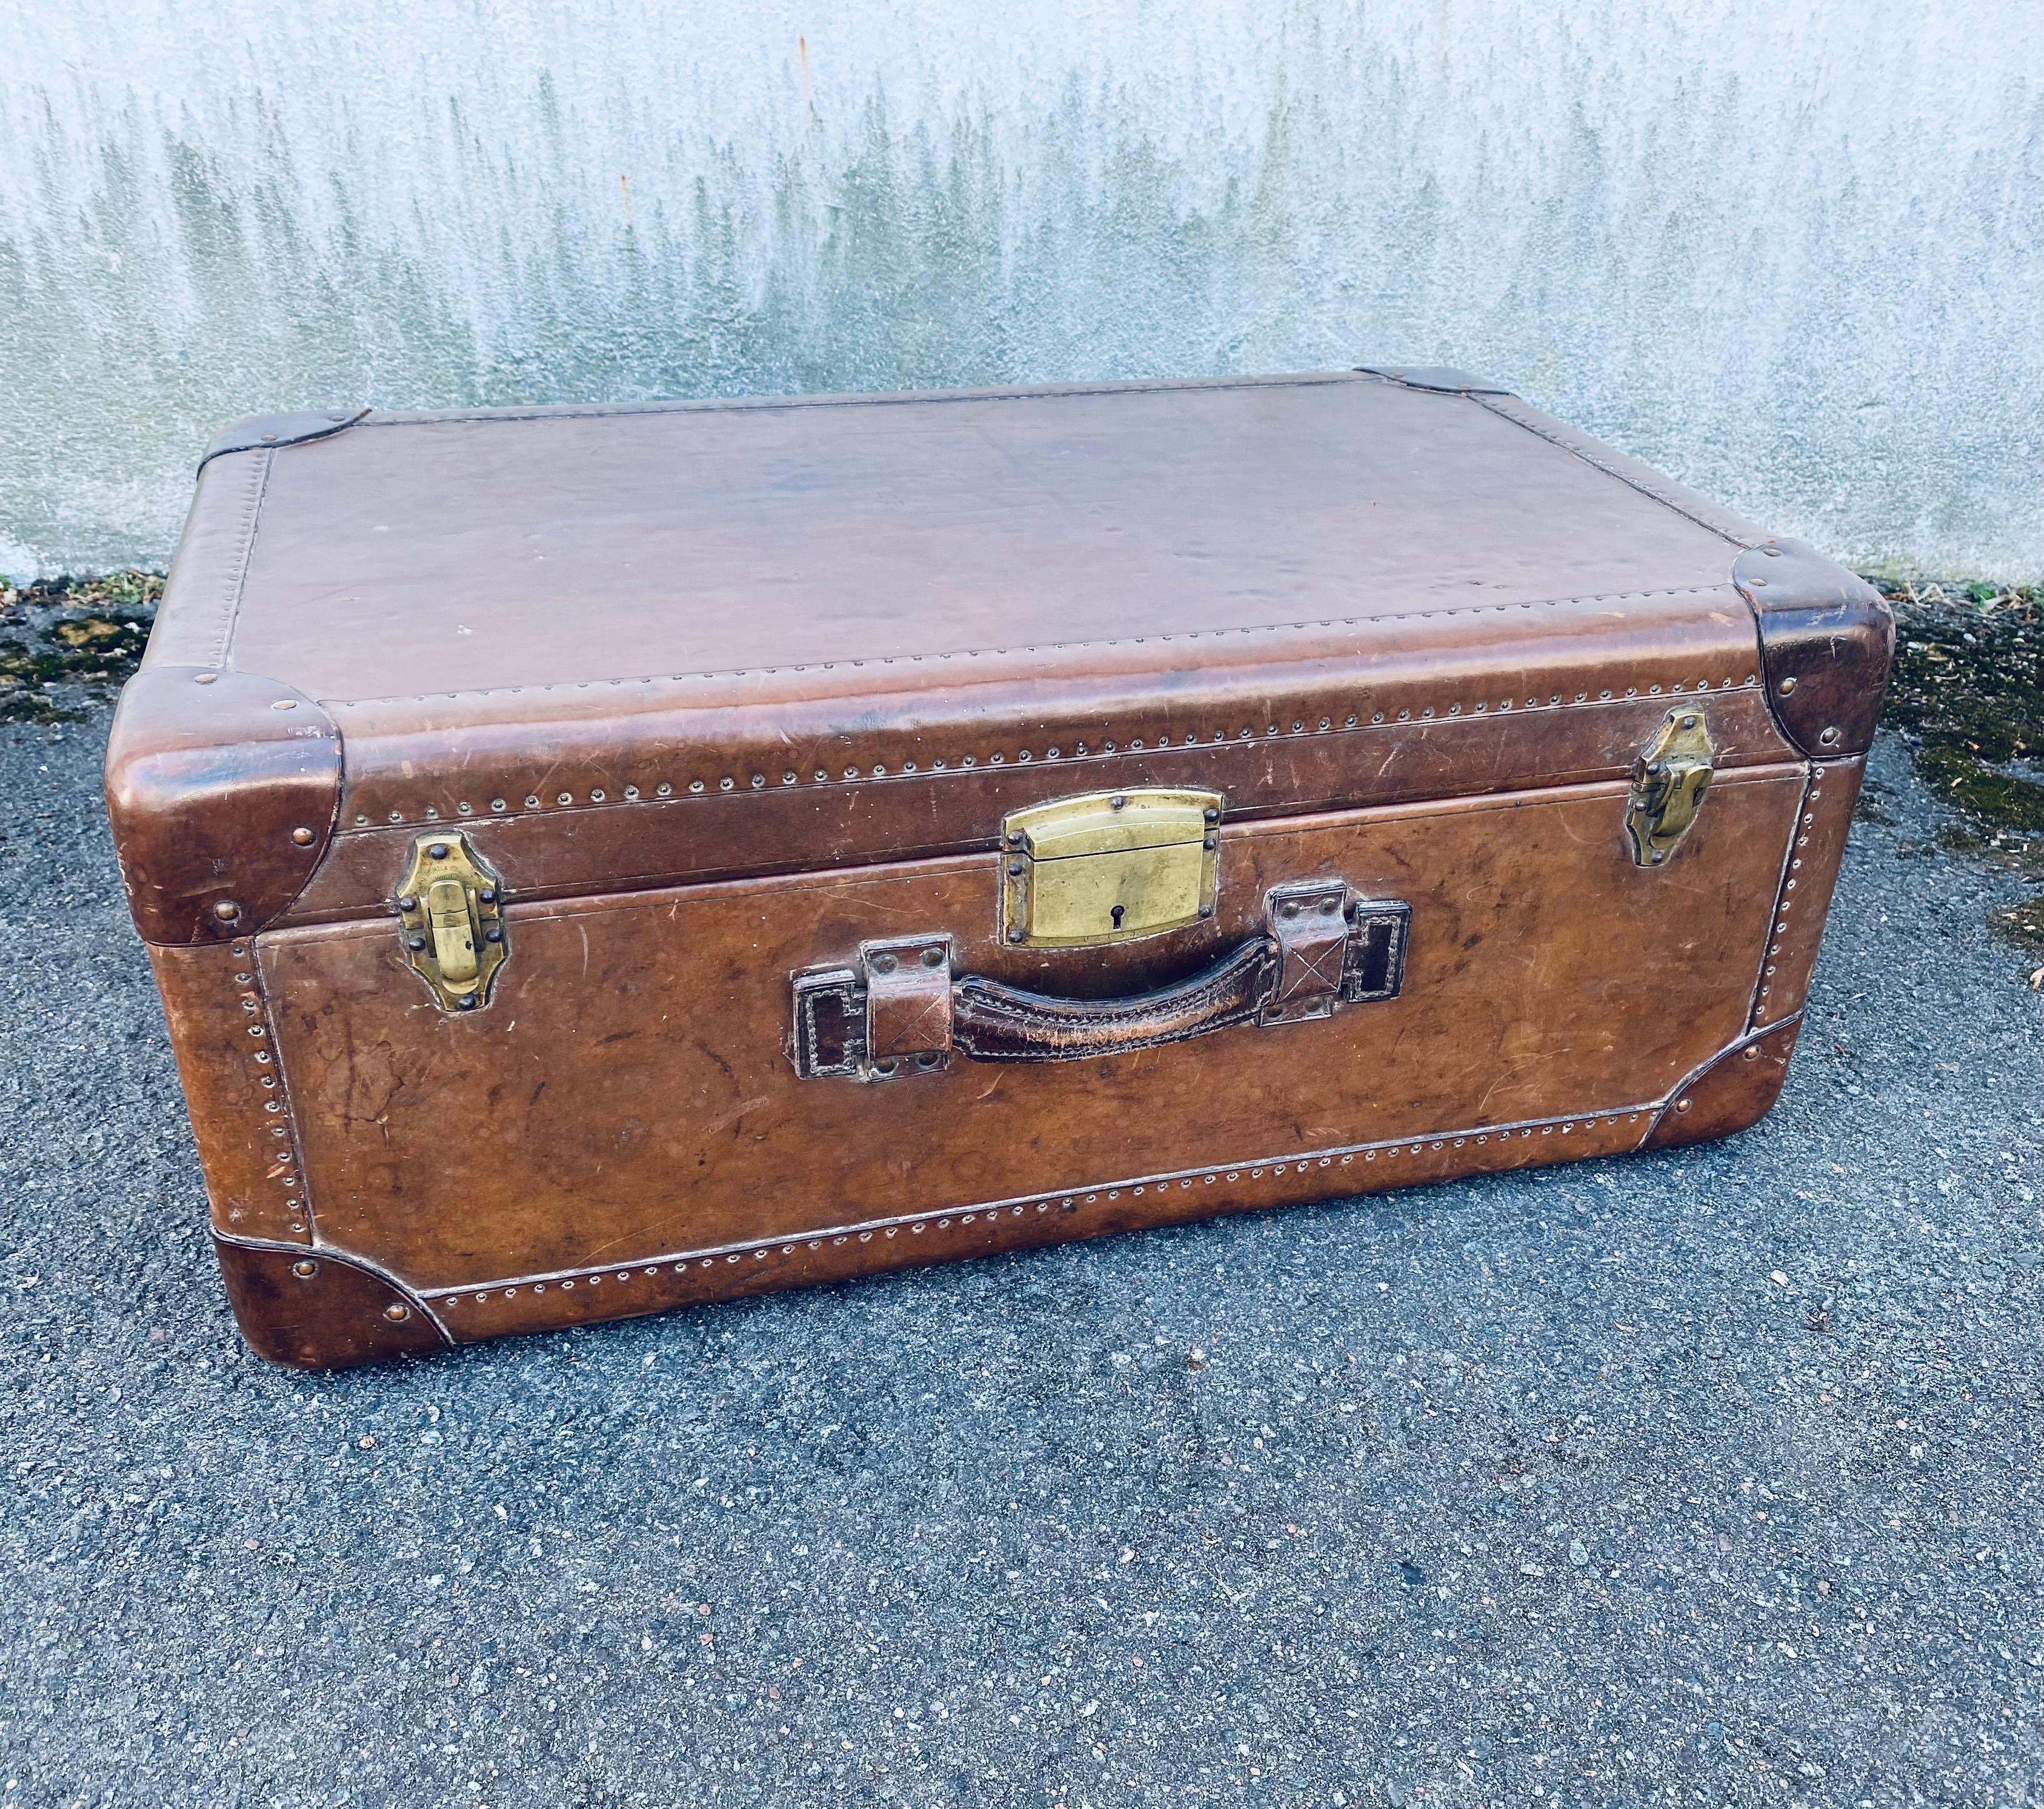 High-quality workmanship, sturdy leather case from M. Würzl & Söhne. The case is covered on the outside with cowhide, which has developed a wonderful patina over the years. The high-quality design is reinforced by the many small brass nails. The